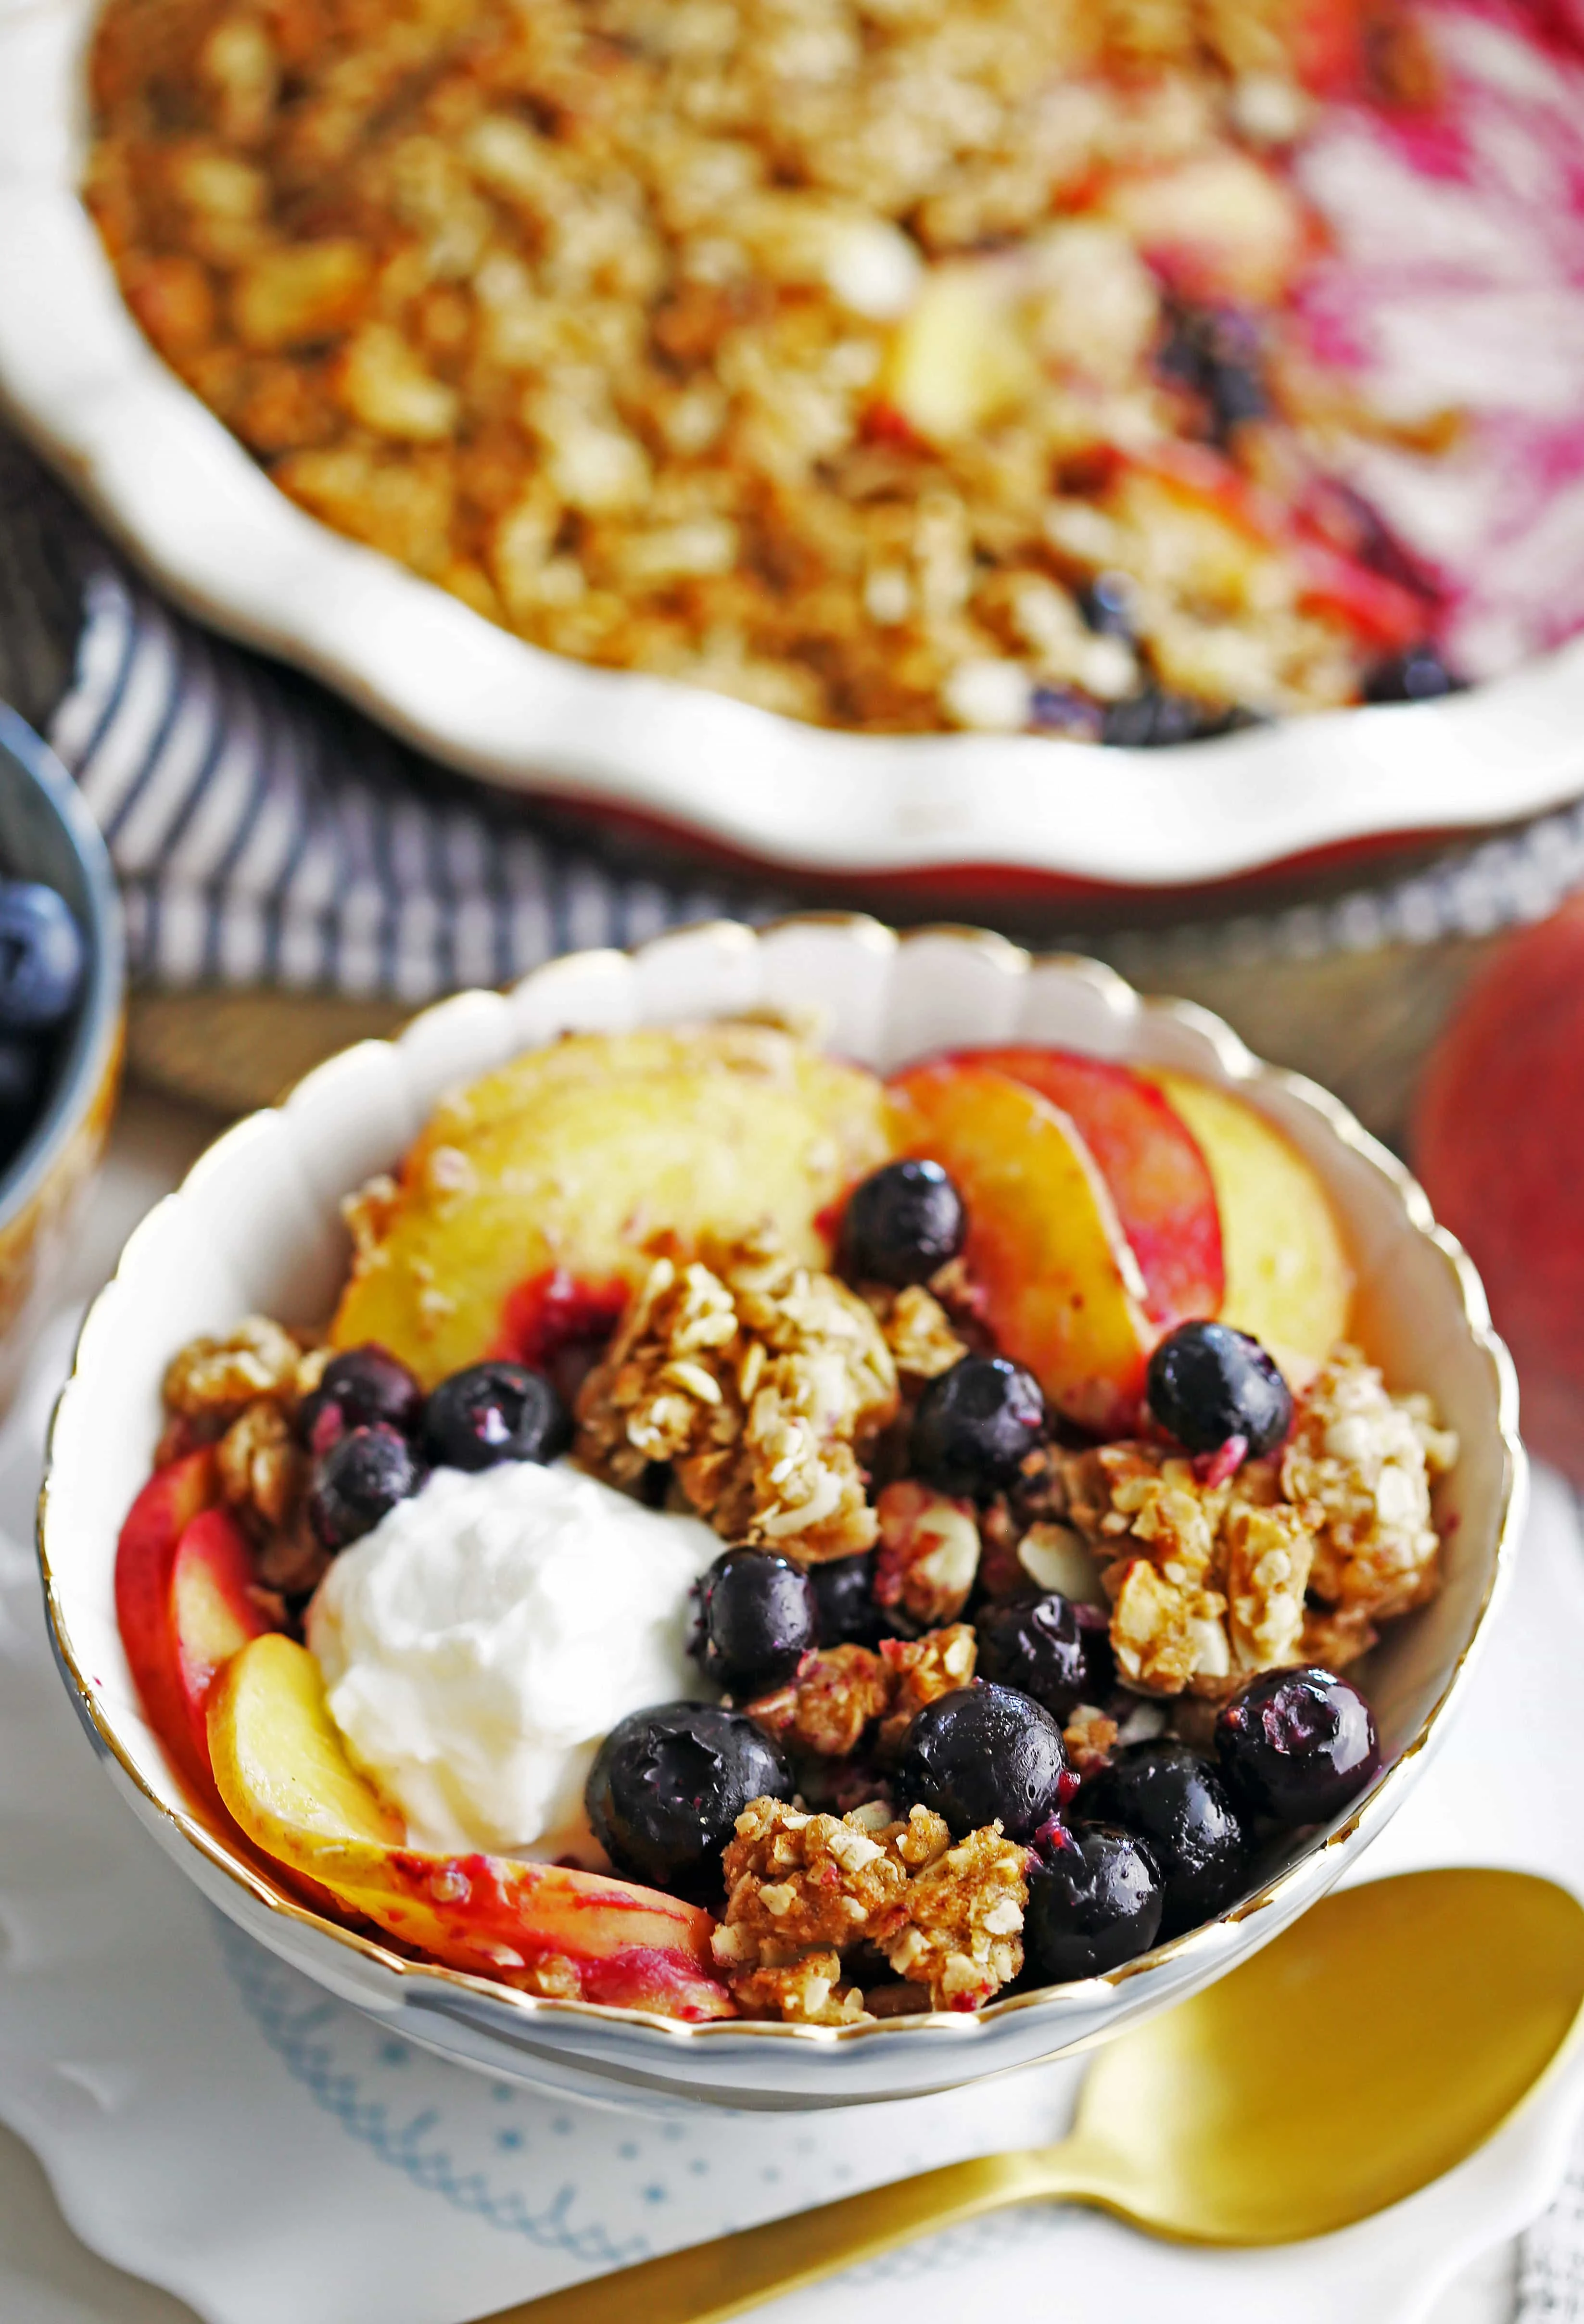 A closeup of a blue and white bowl containing blueberry peach crisp with a dollop of whipped cream.